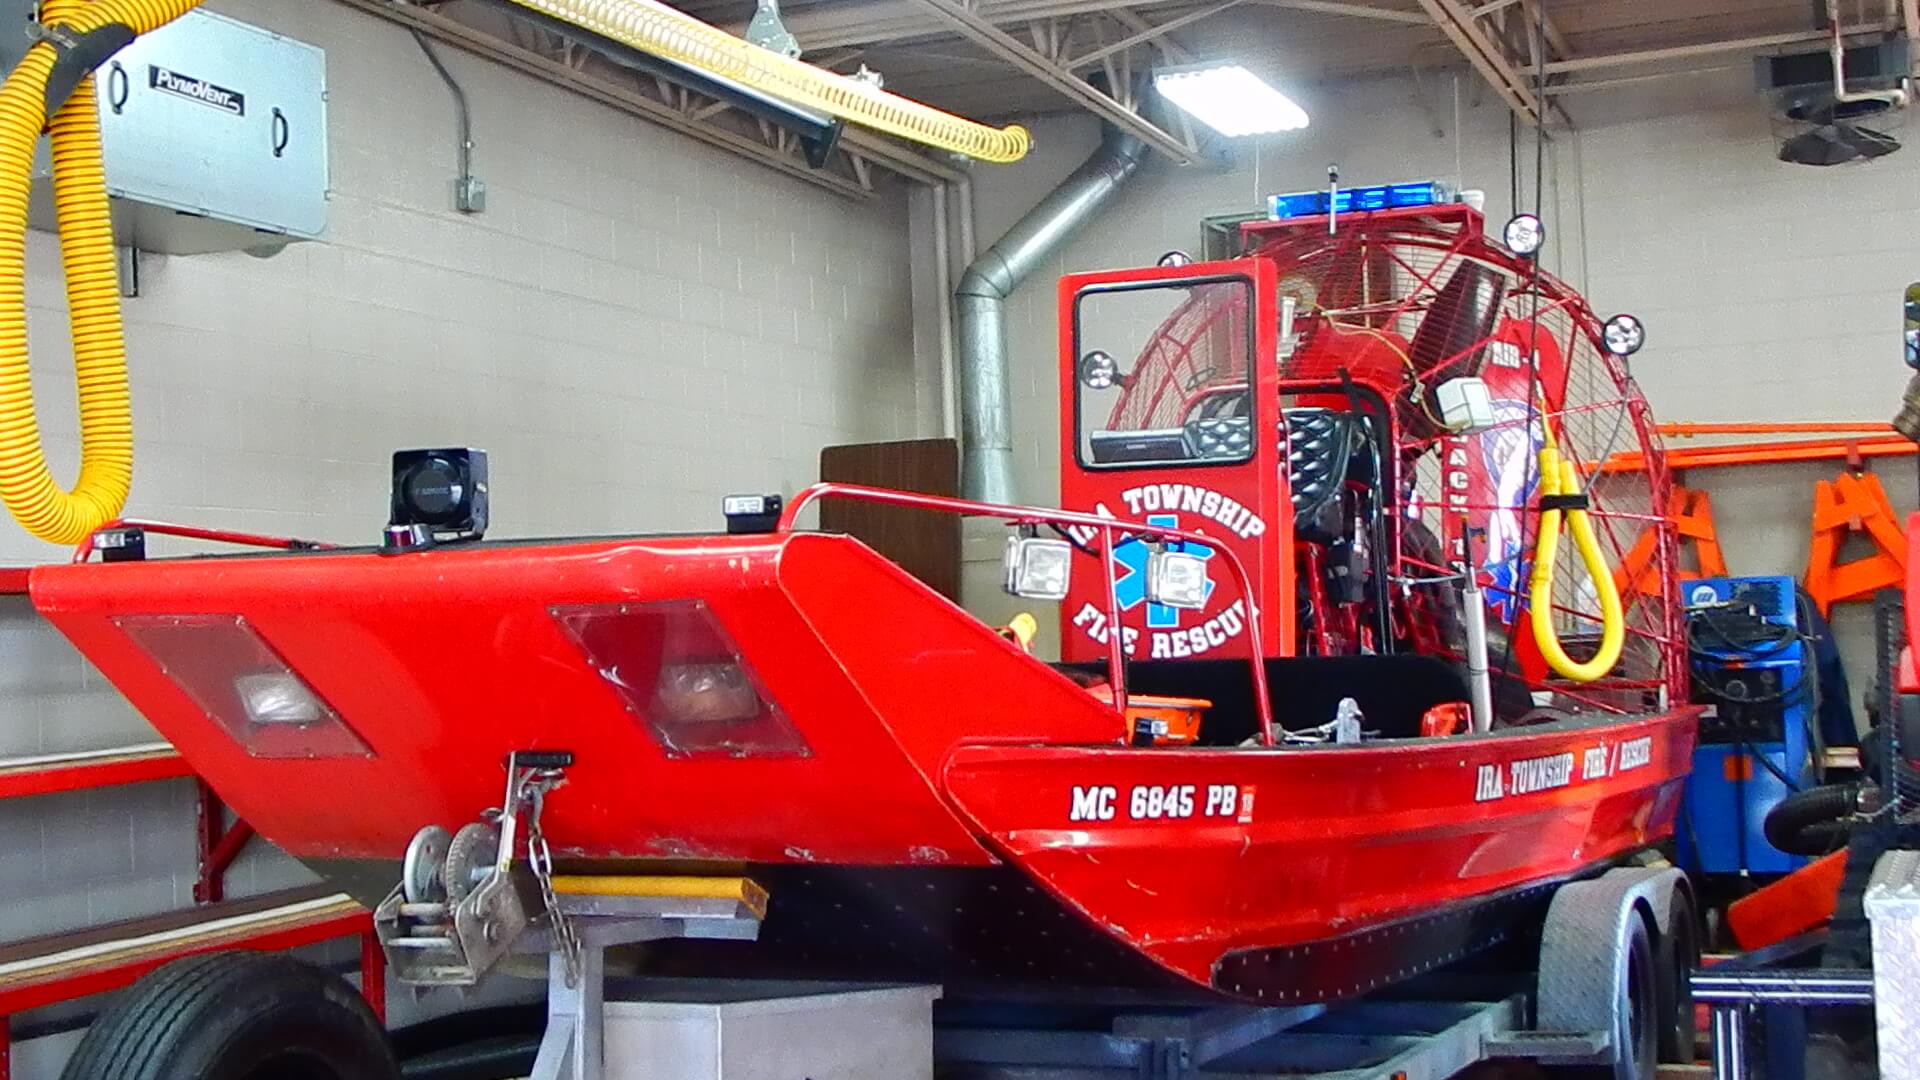 A red boat in a garage with Ira Township written on the side.